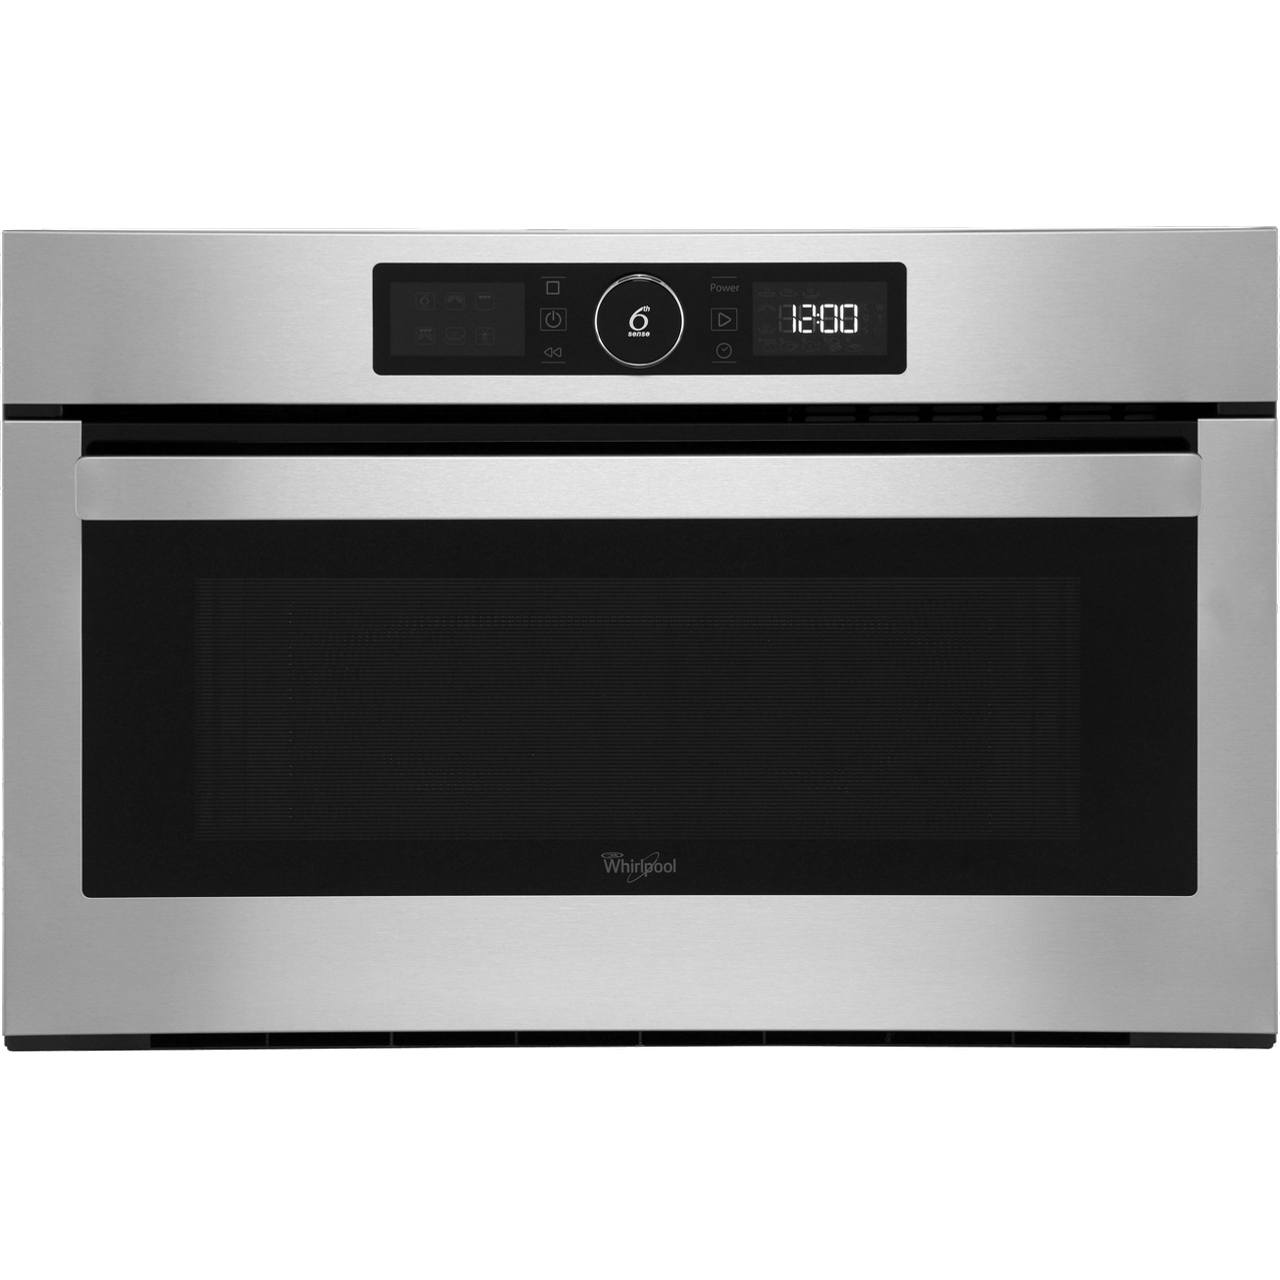 Whirlpool AMW730IX Built In Microwave With Grill Review